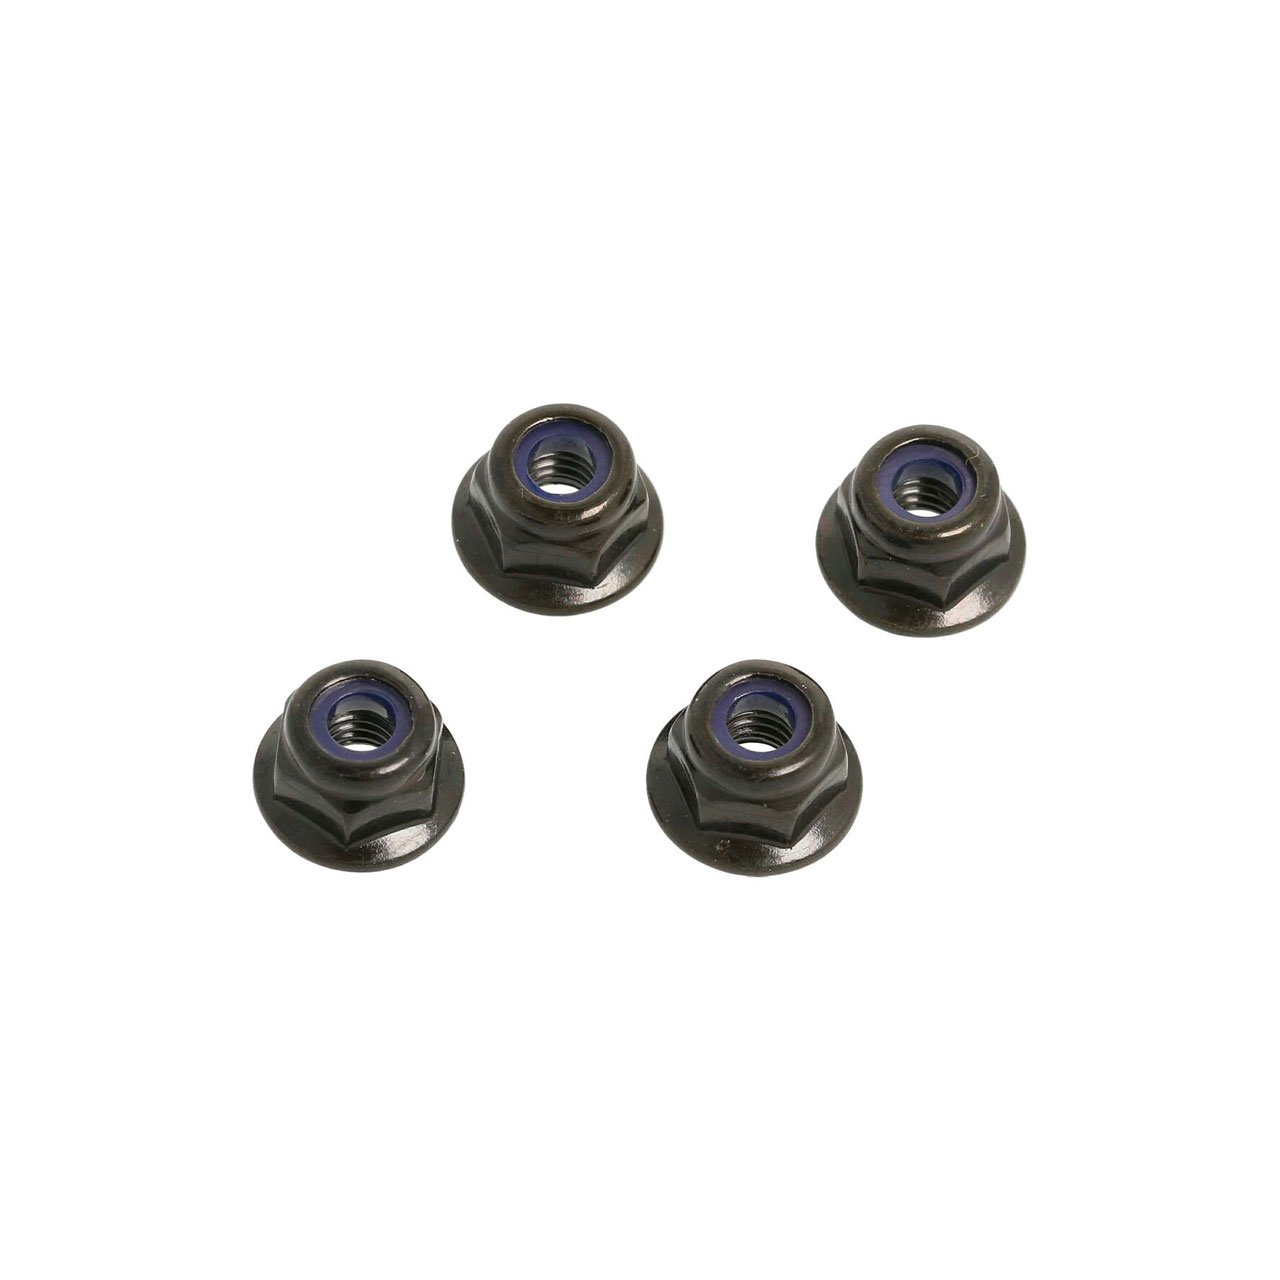 Flanged Lock Nuts [Fits Torch & Hooligan Monster